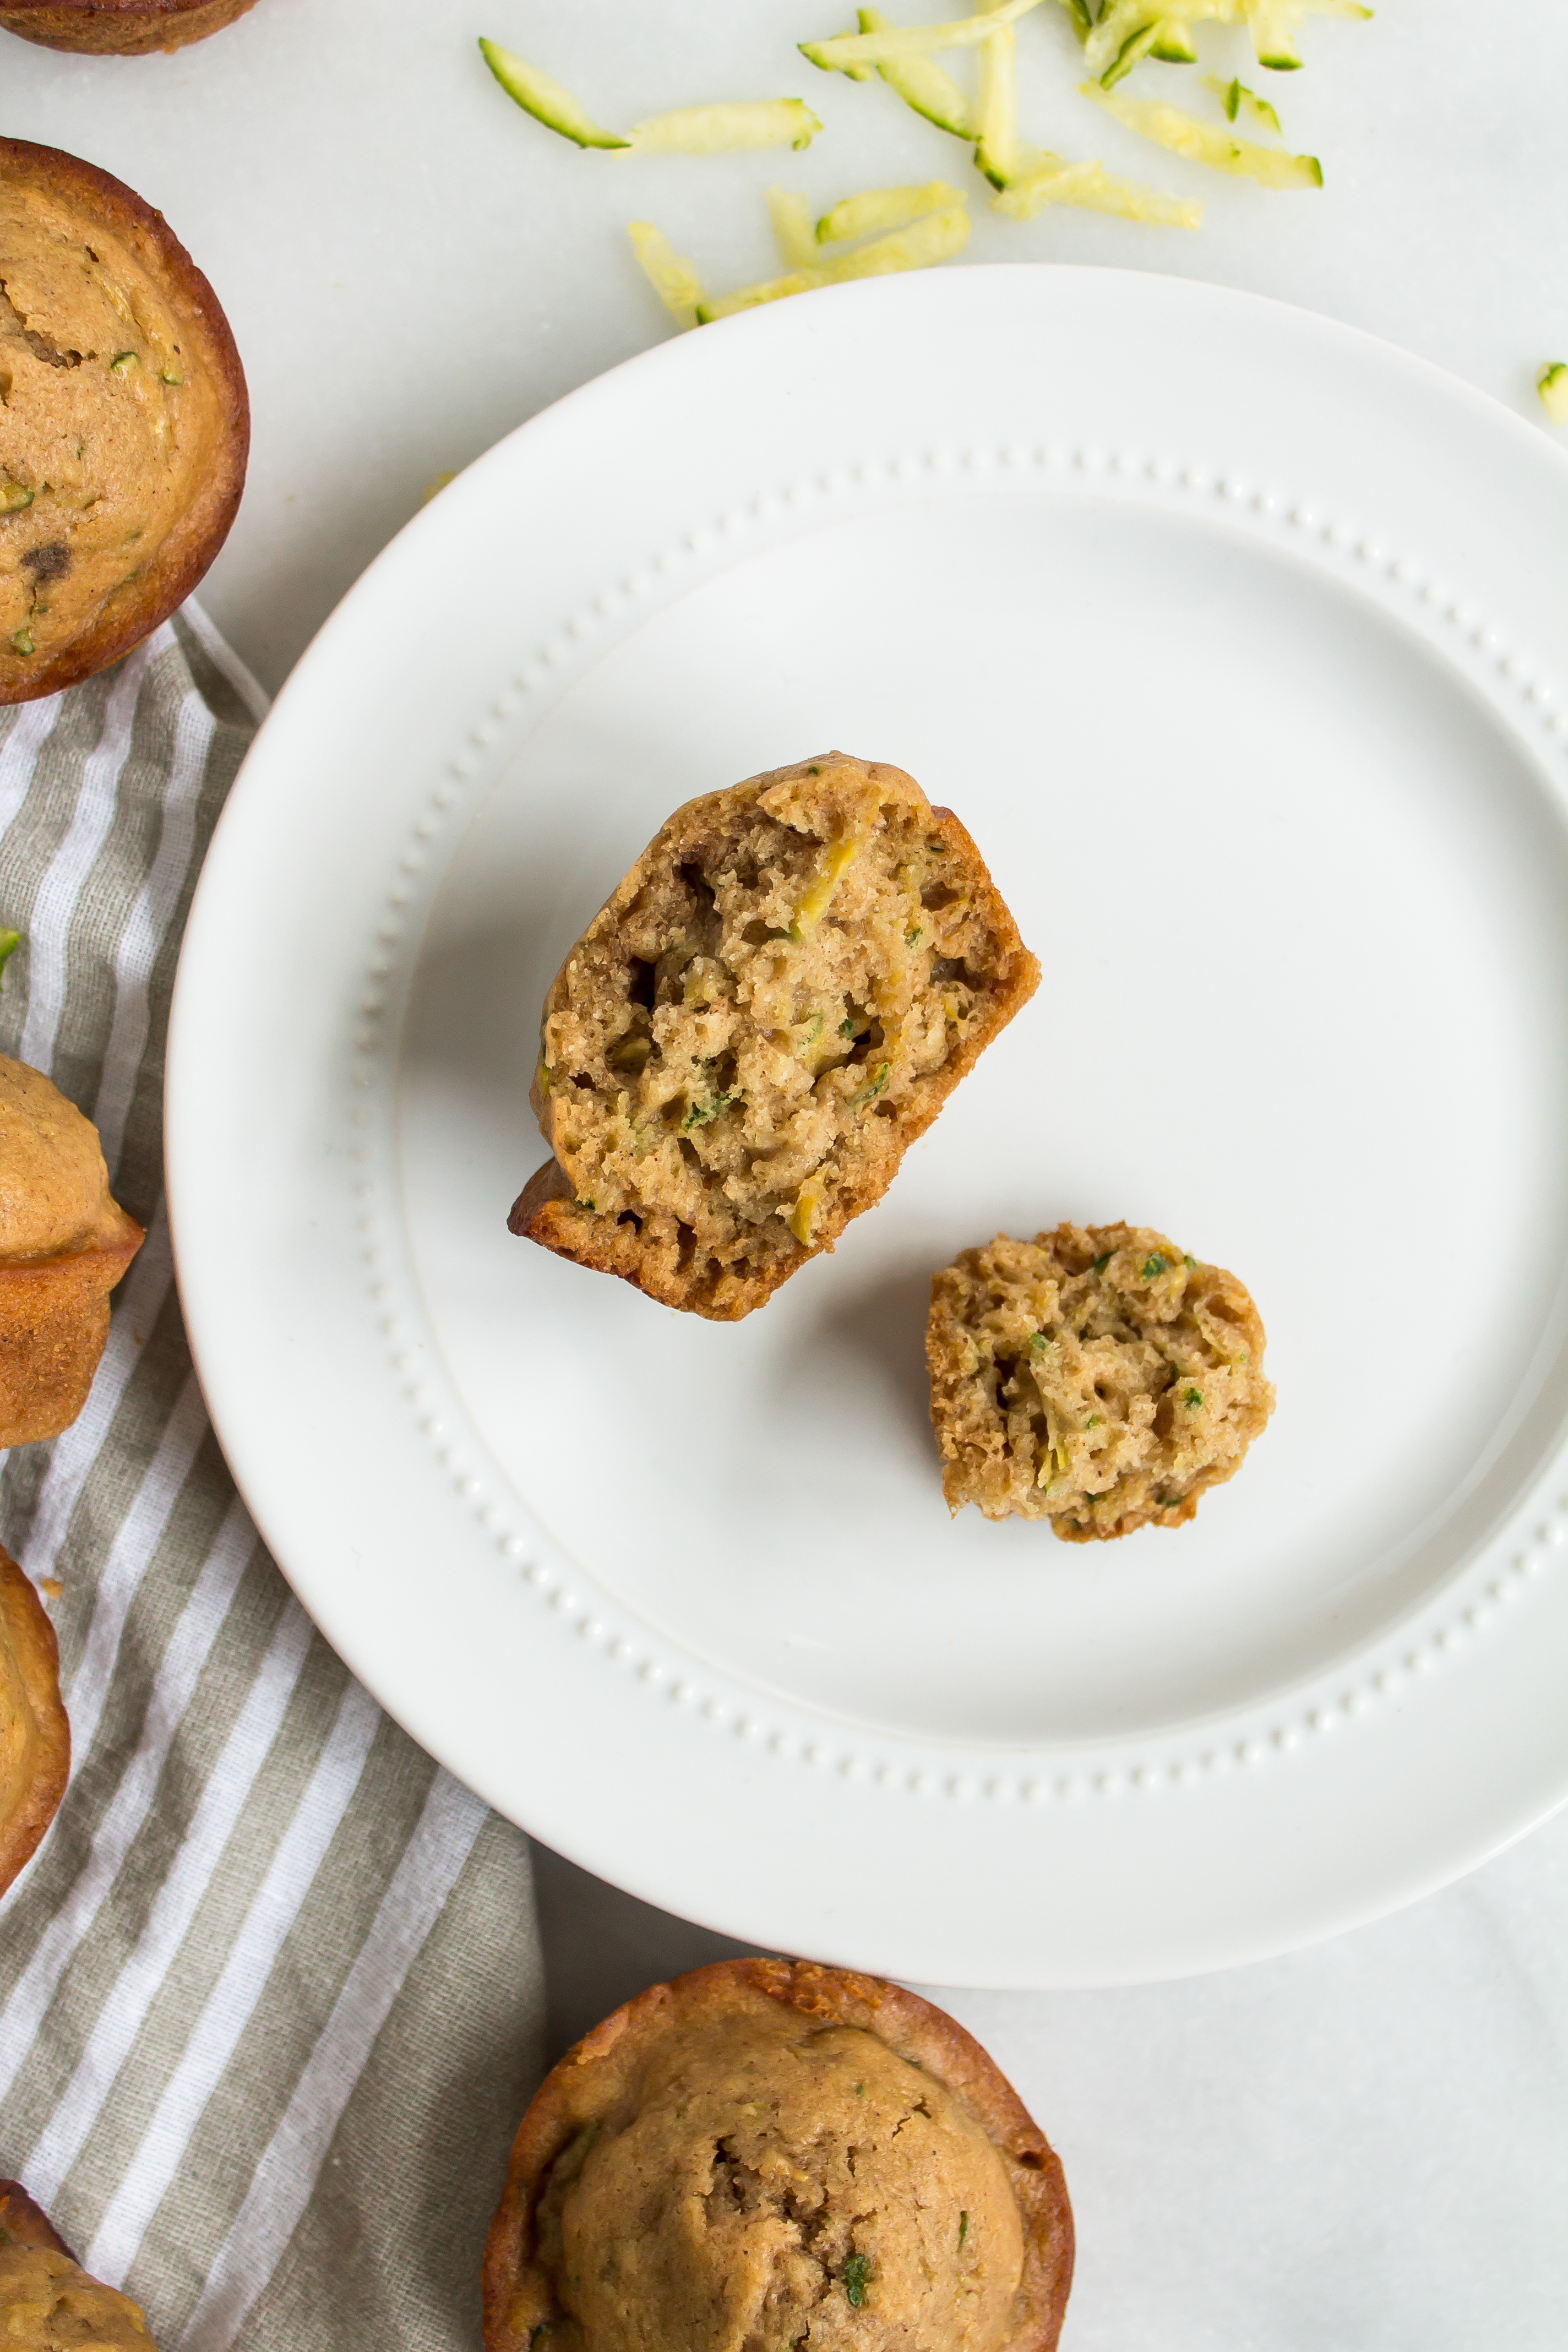 Zucchini muffins that are easy and totally delicious? And healthier too? Look no further! This recipe is for you. | glitterinc.com | @glitterinc - Healthier Zucchini Muffins Recipe by popular North Carolina foodie blog Glitter, Inc.